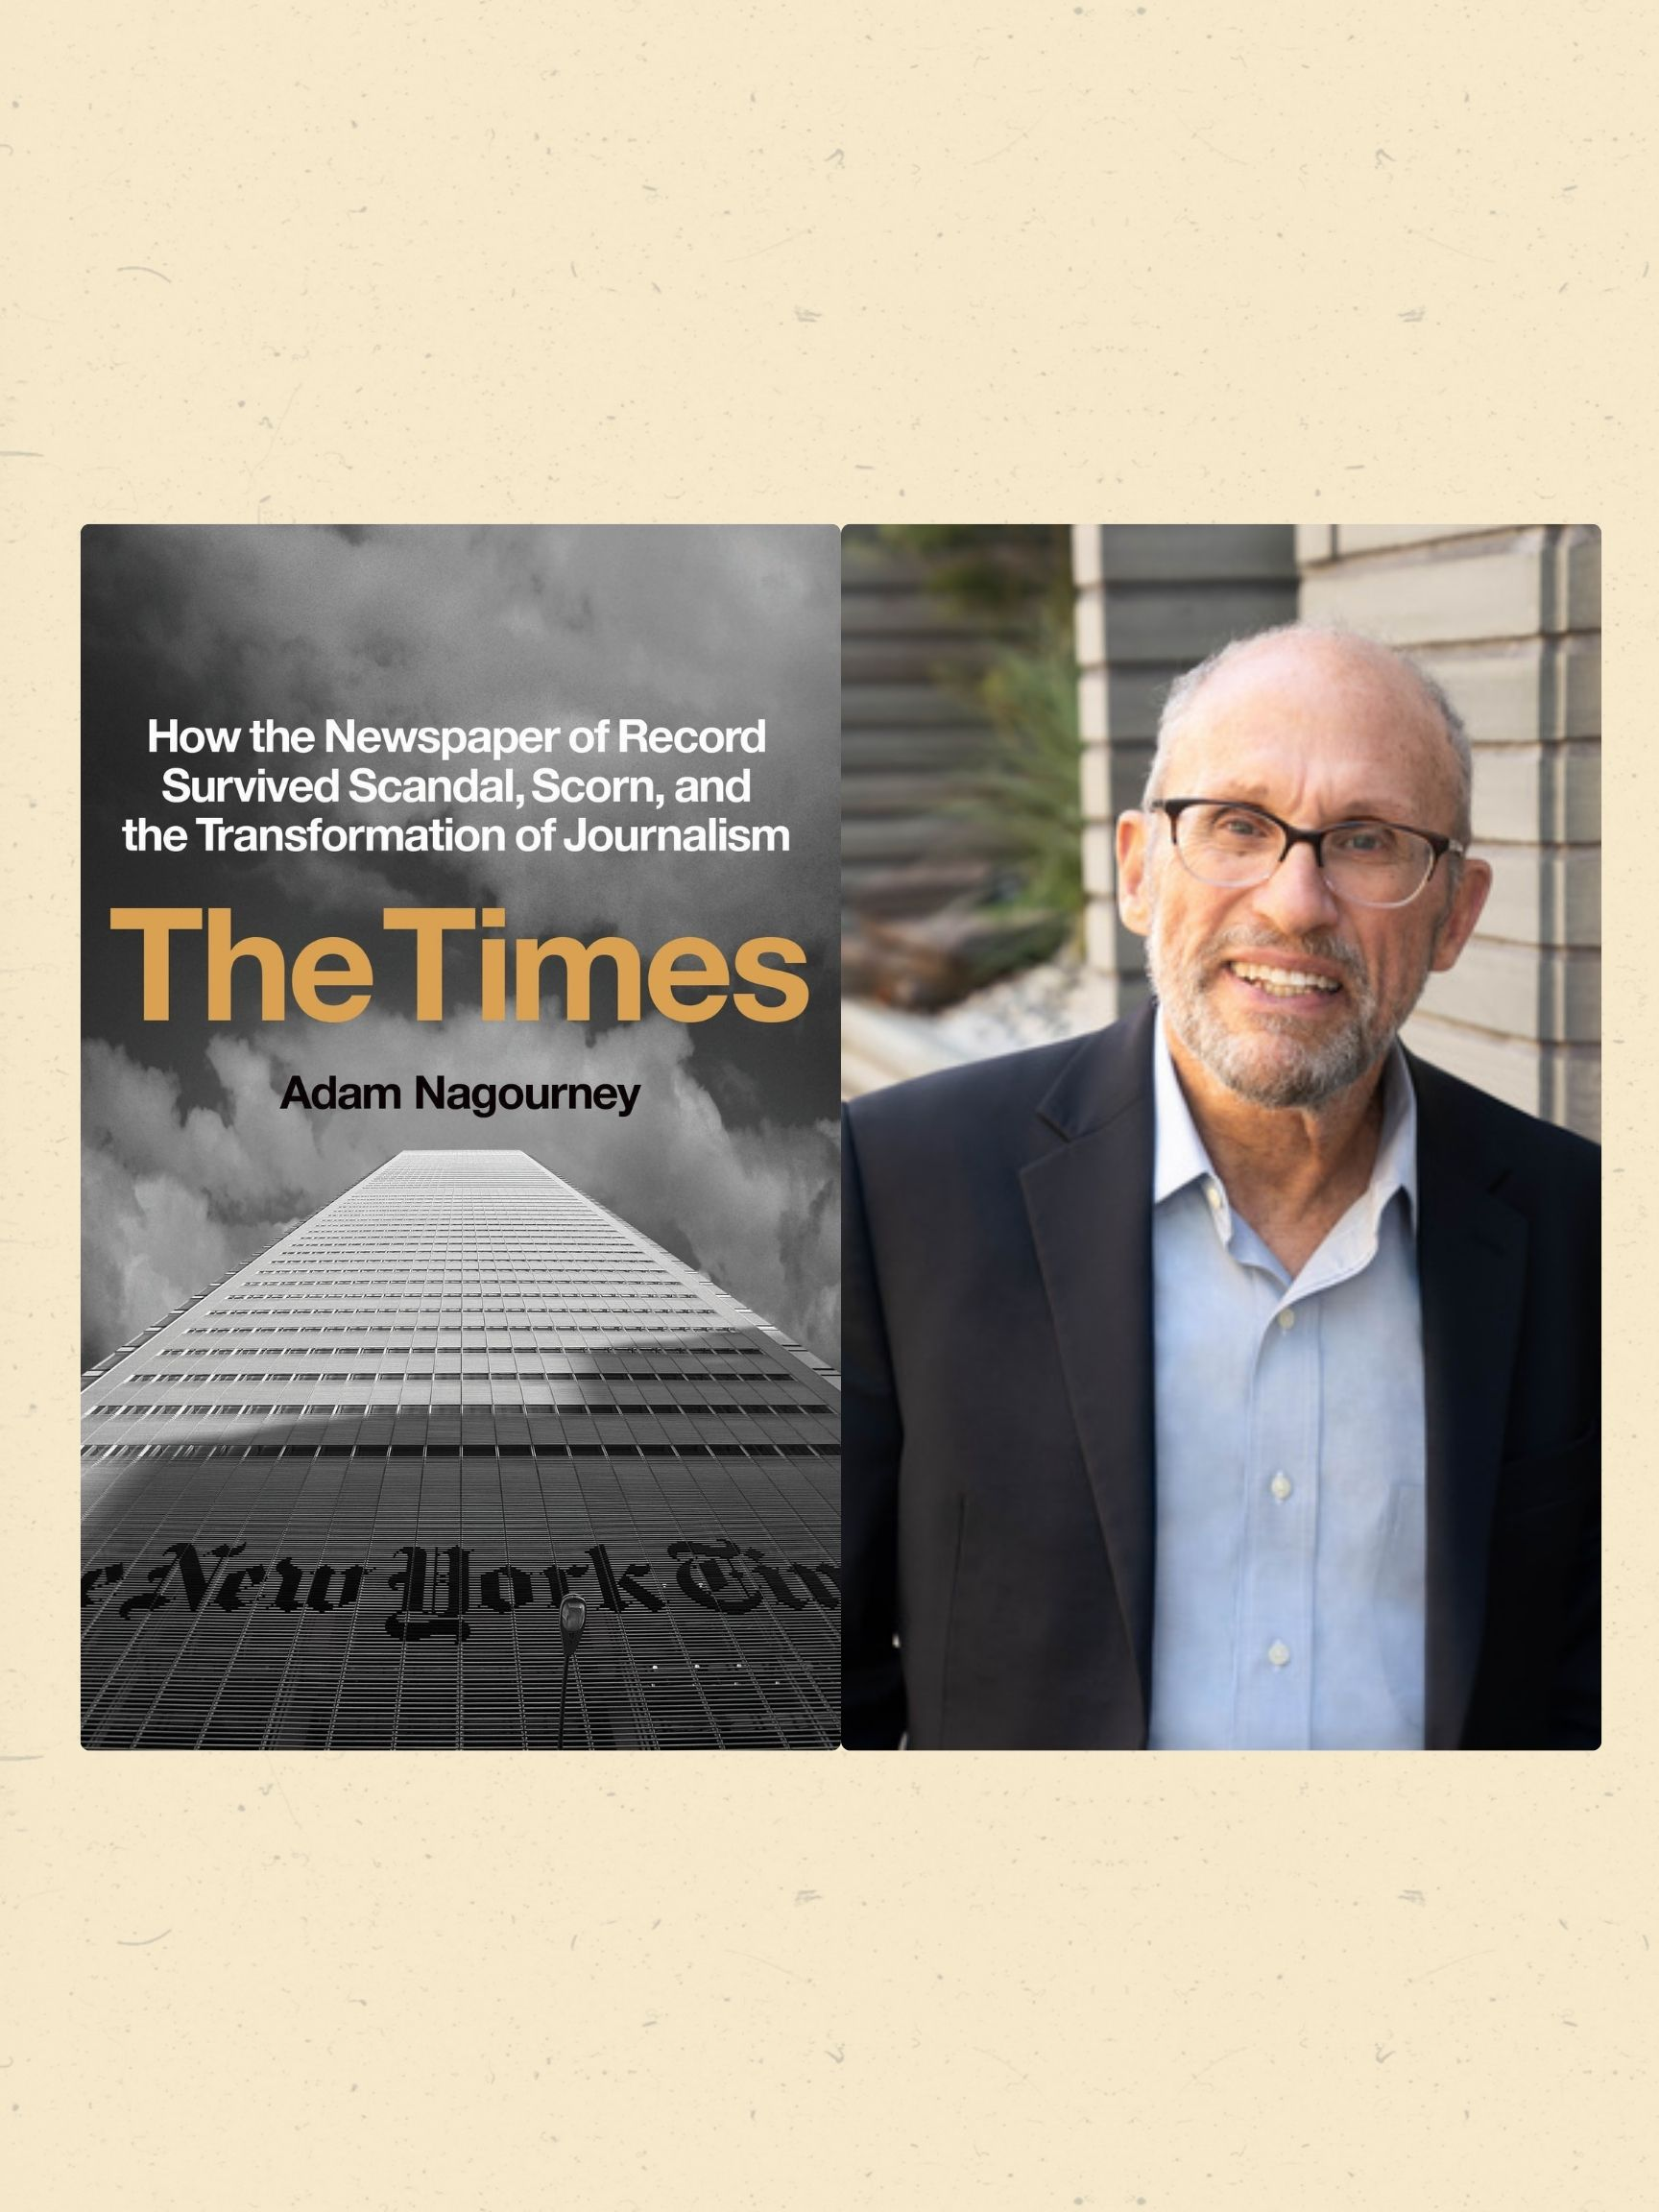 Adam Nagourney on the real story behind the New York Times